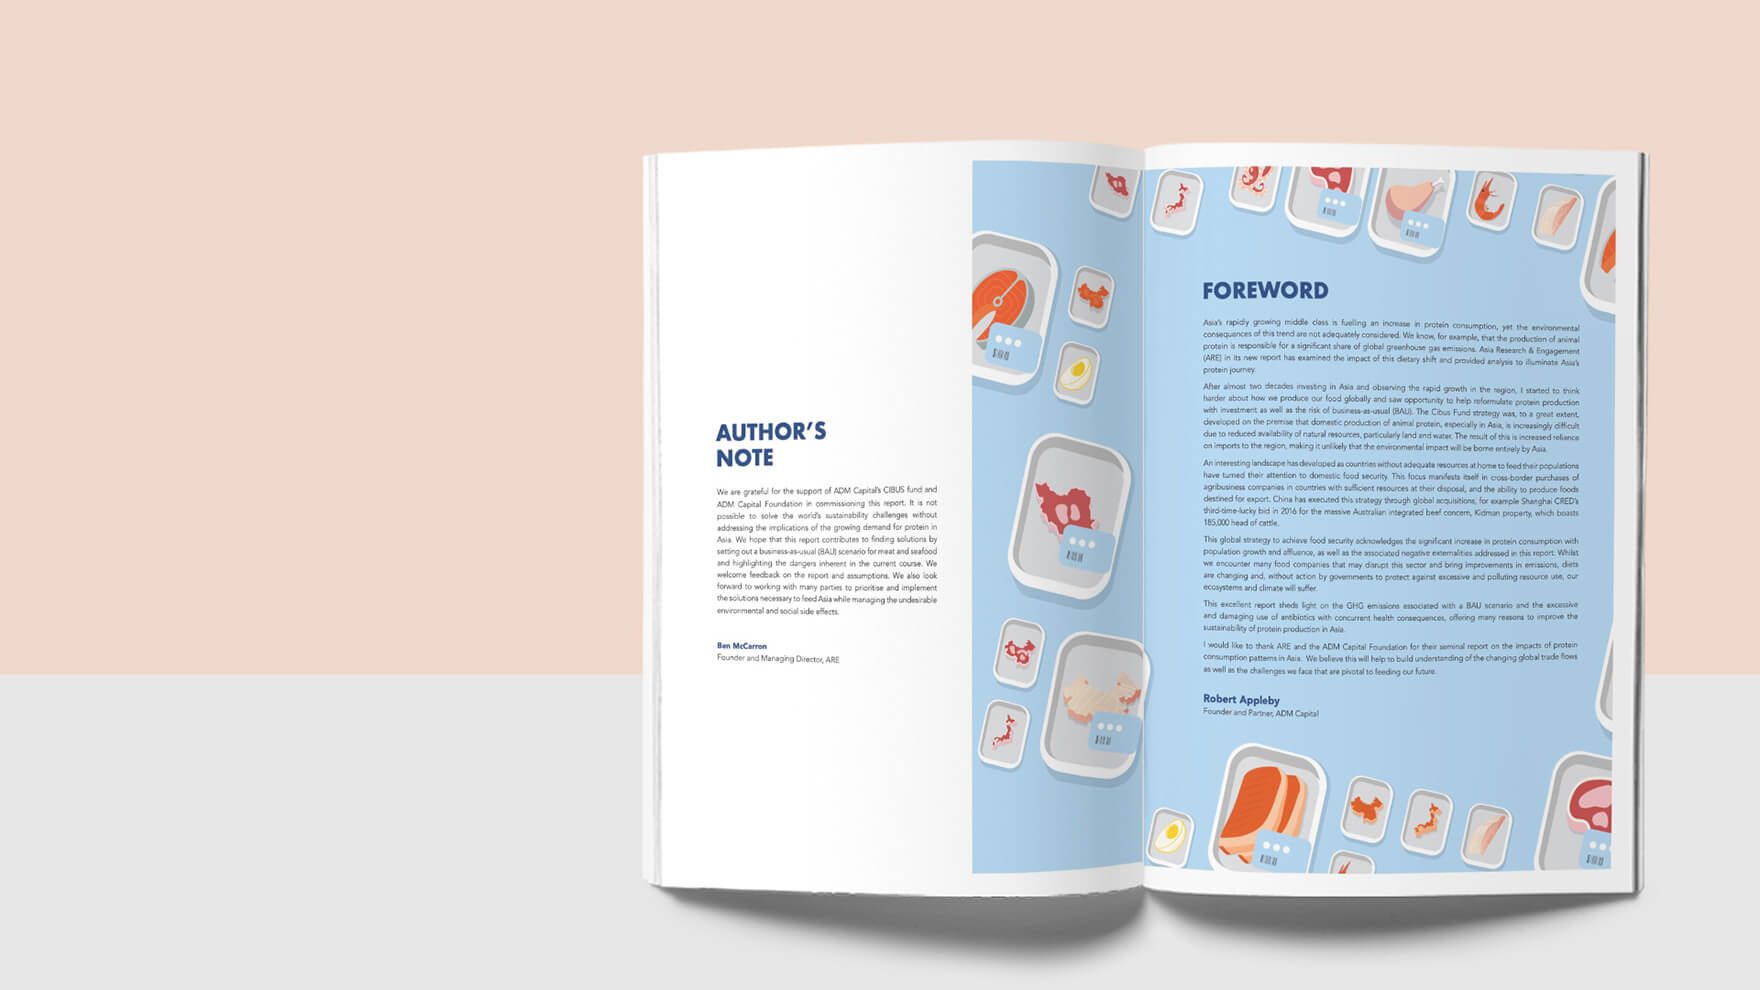 Branding Agency Hong Kong_ADMCF_ChartingAsiasProteinJourney_Research Report Design_CheddarMedia_2_1760